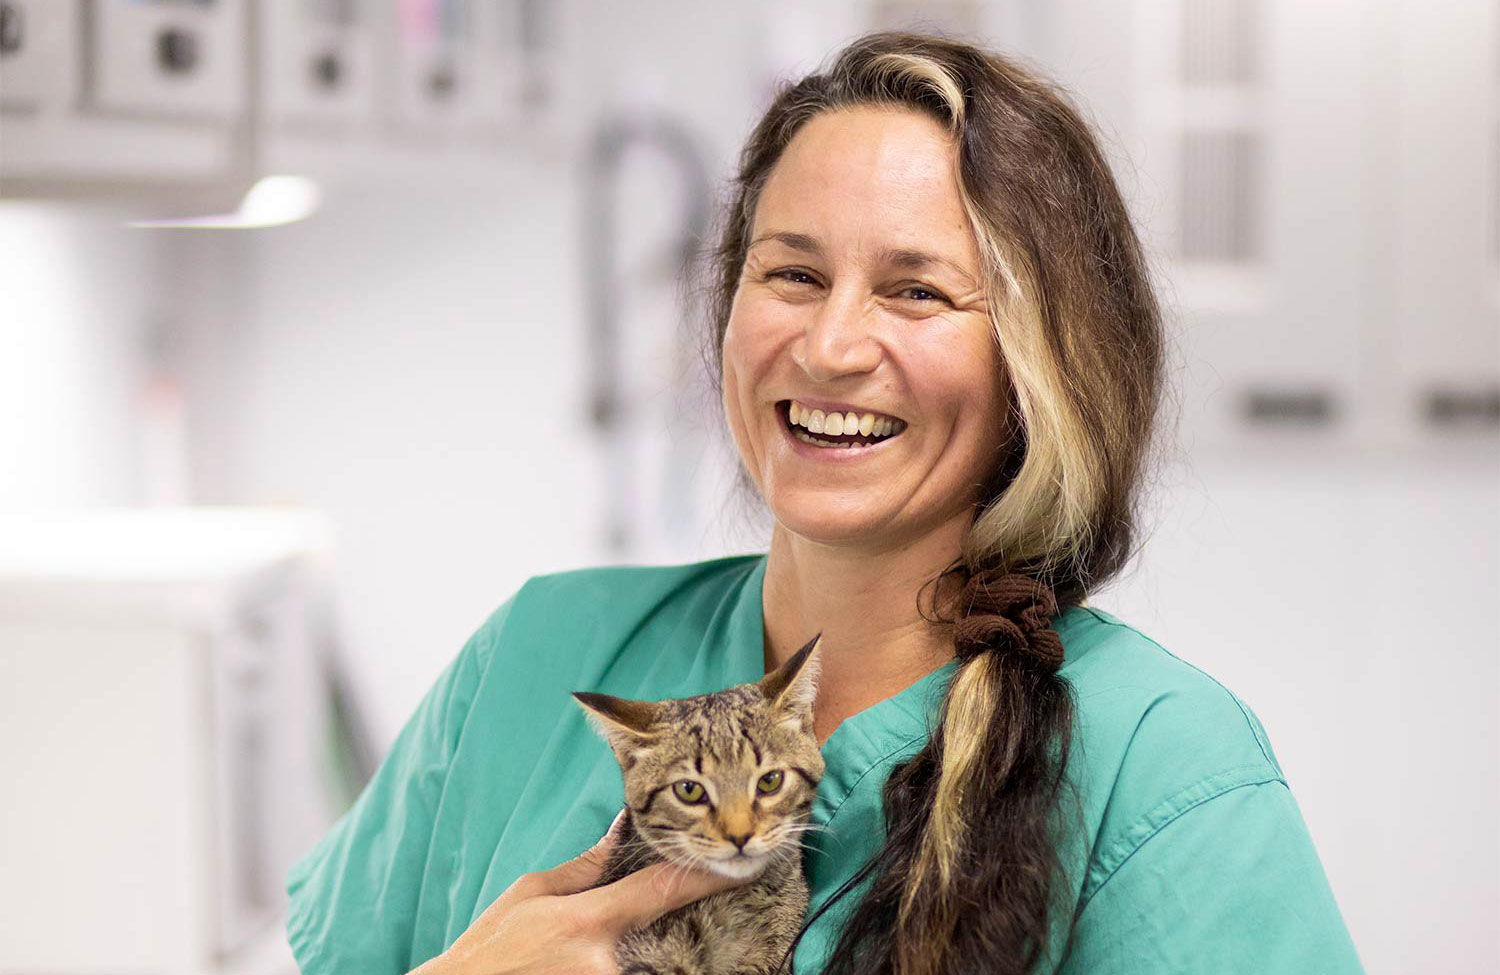 A smiling Jennifer Weisent holding a gray tabby cat.